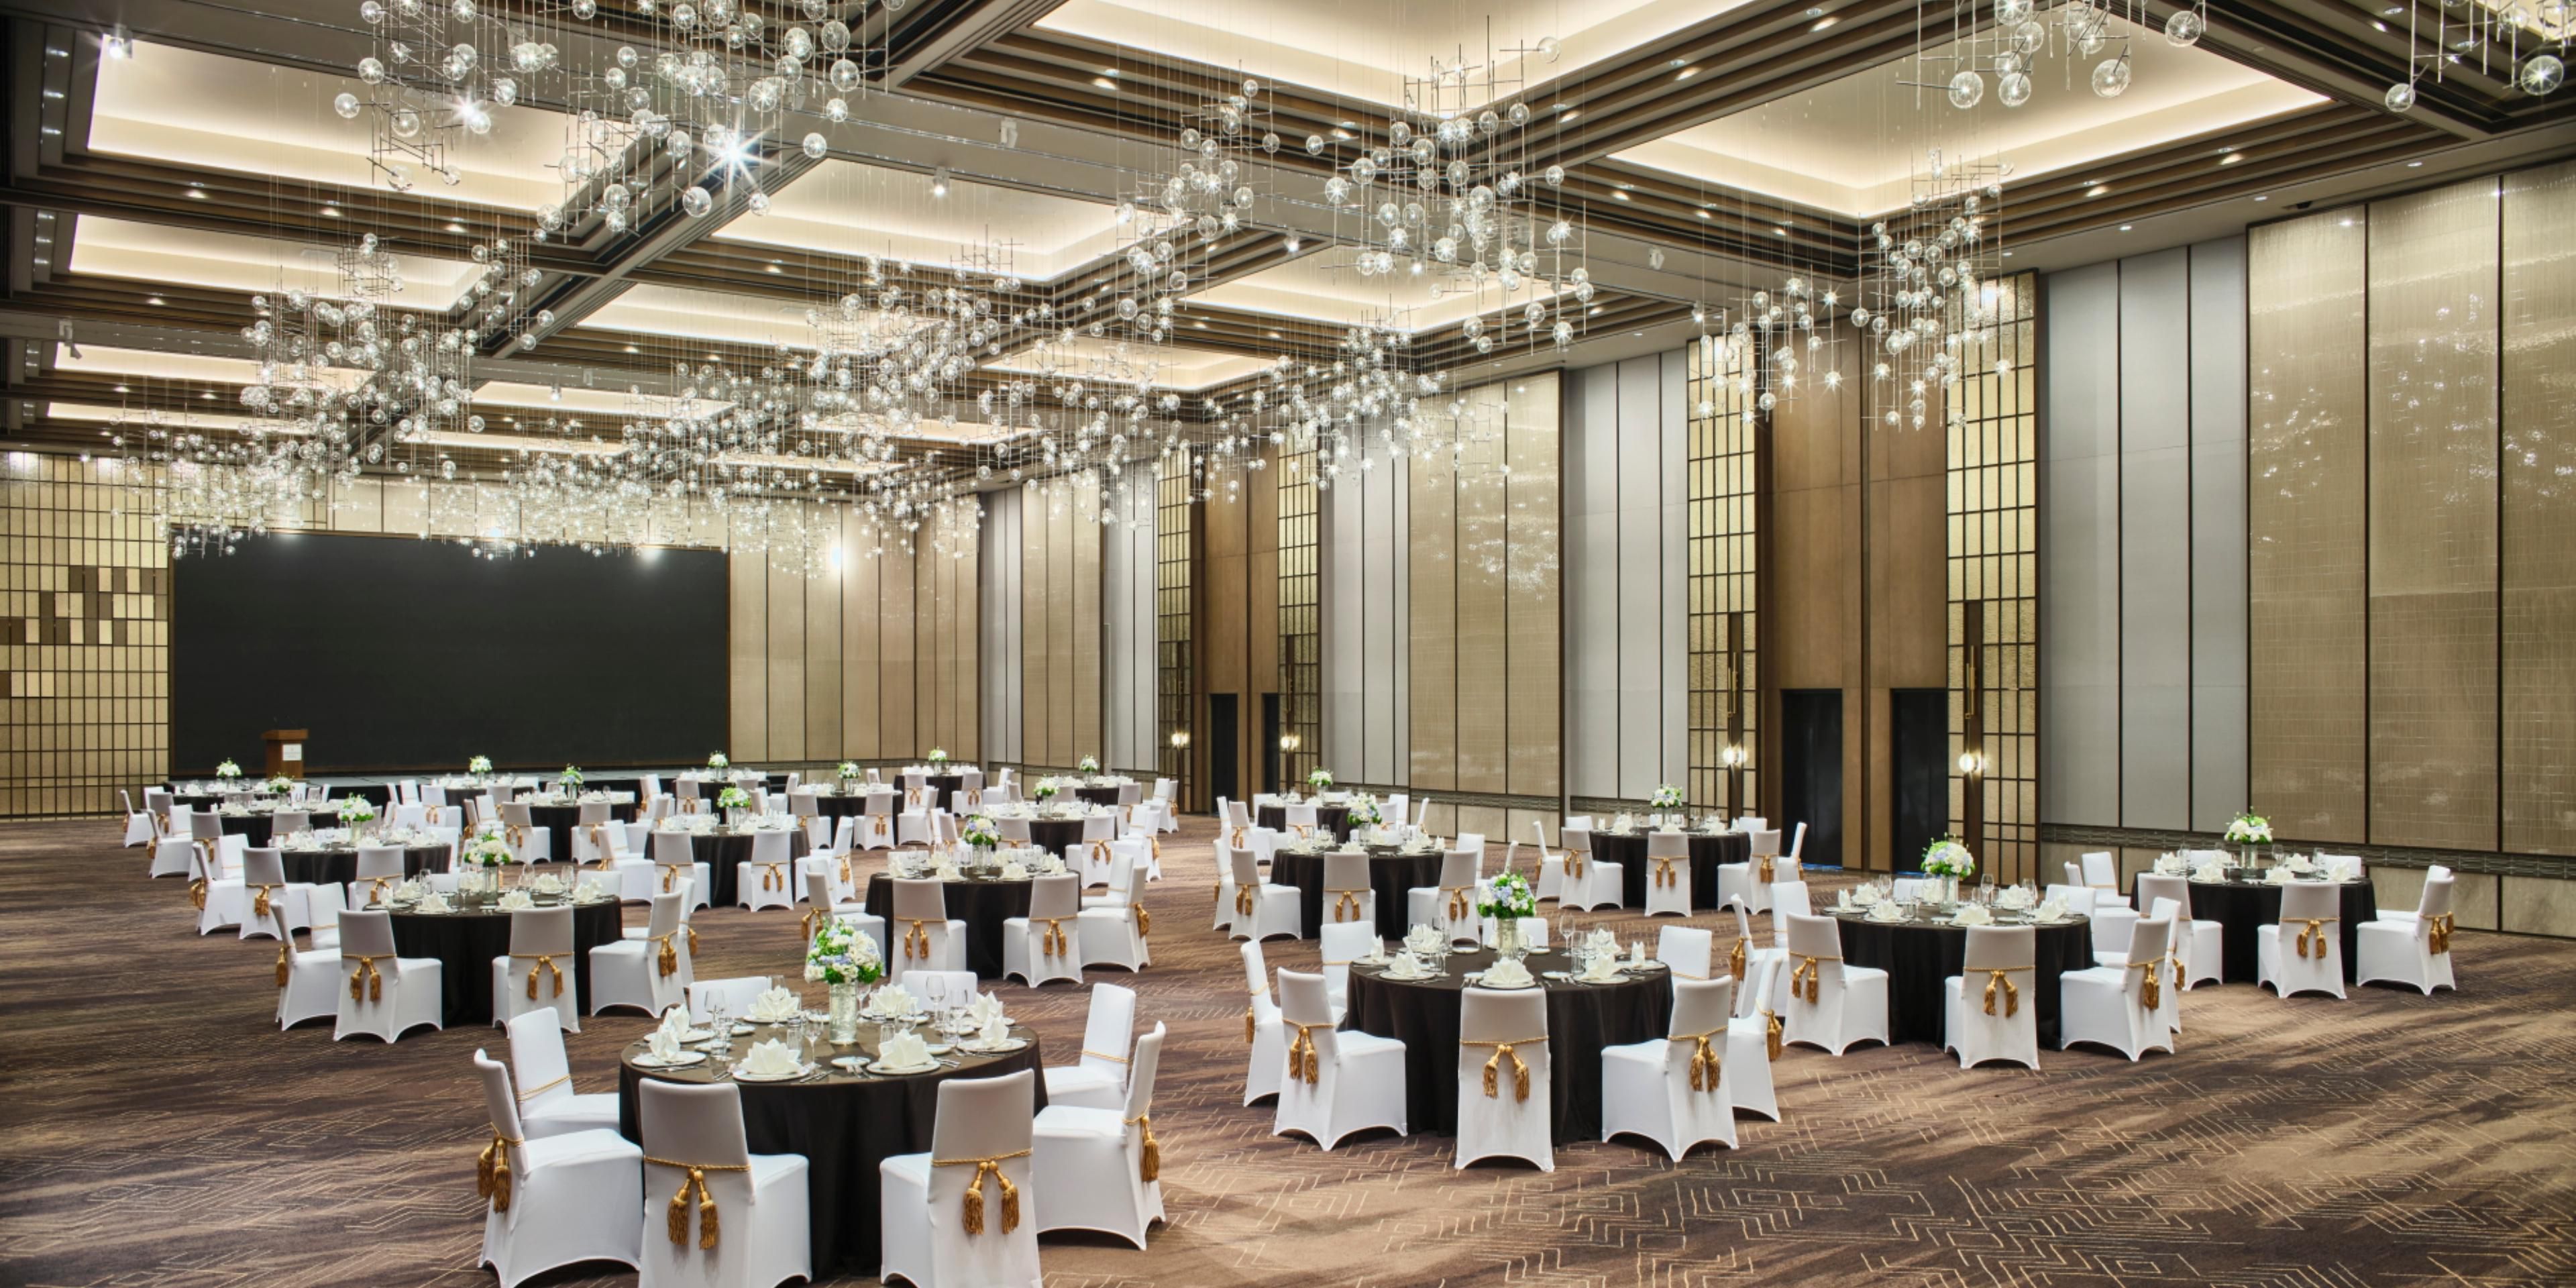 The Ballroom is highlighted by a 1,100-square-meter pillarless Grand Ballroom that accommodates close to one-thousand people and can be divided into three ballrooms. A bronze textured mansion door gives the venue’s historical ambience a touch of luxury.